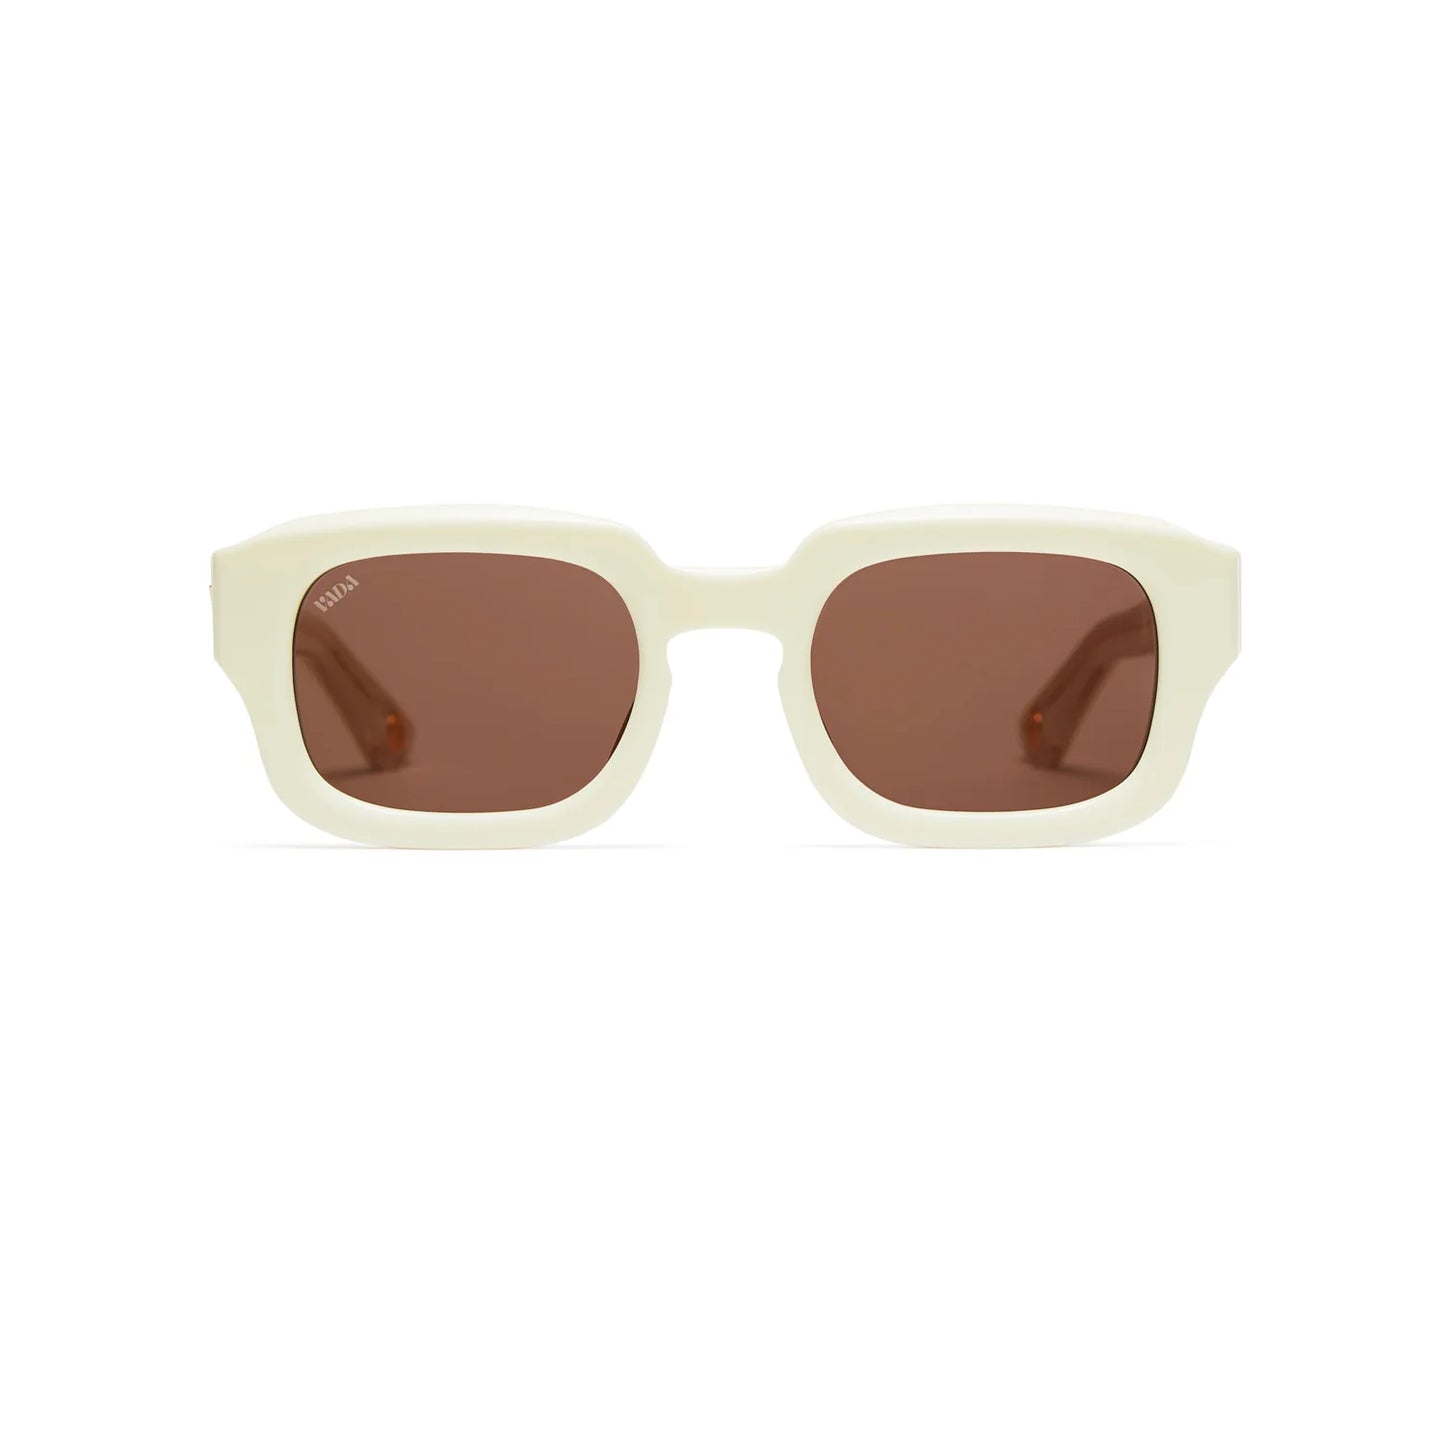 HASKELL Sunglasses by VADA